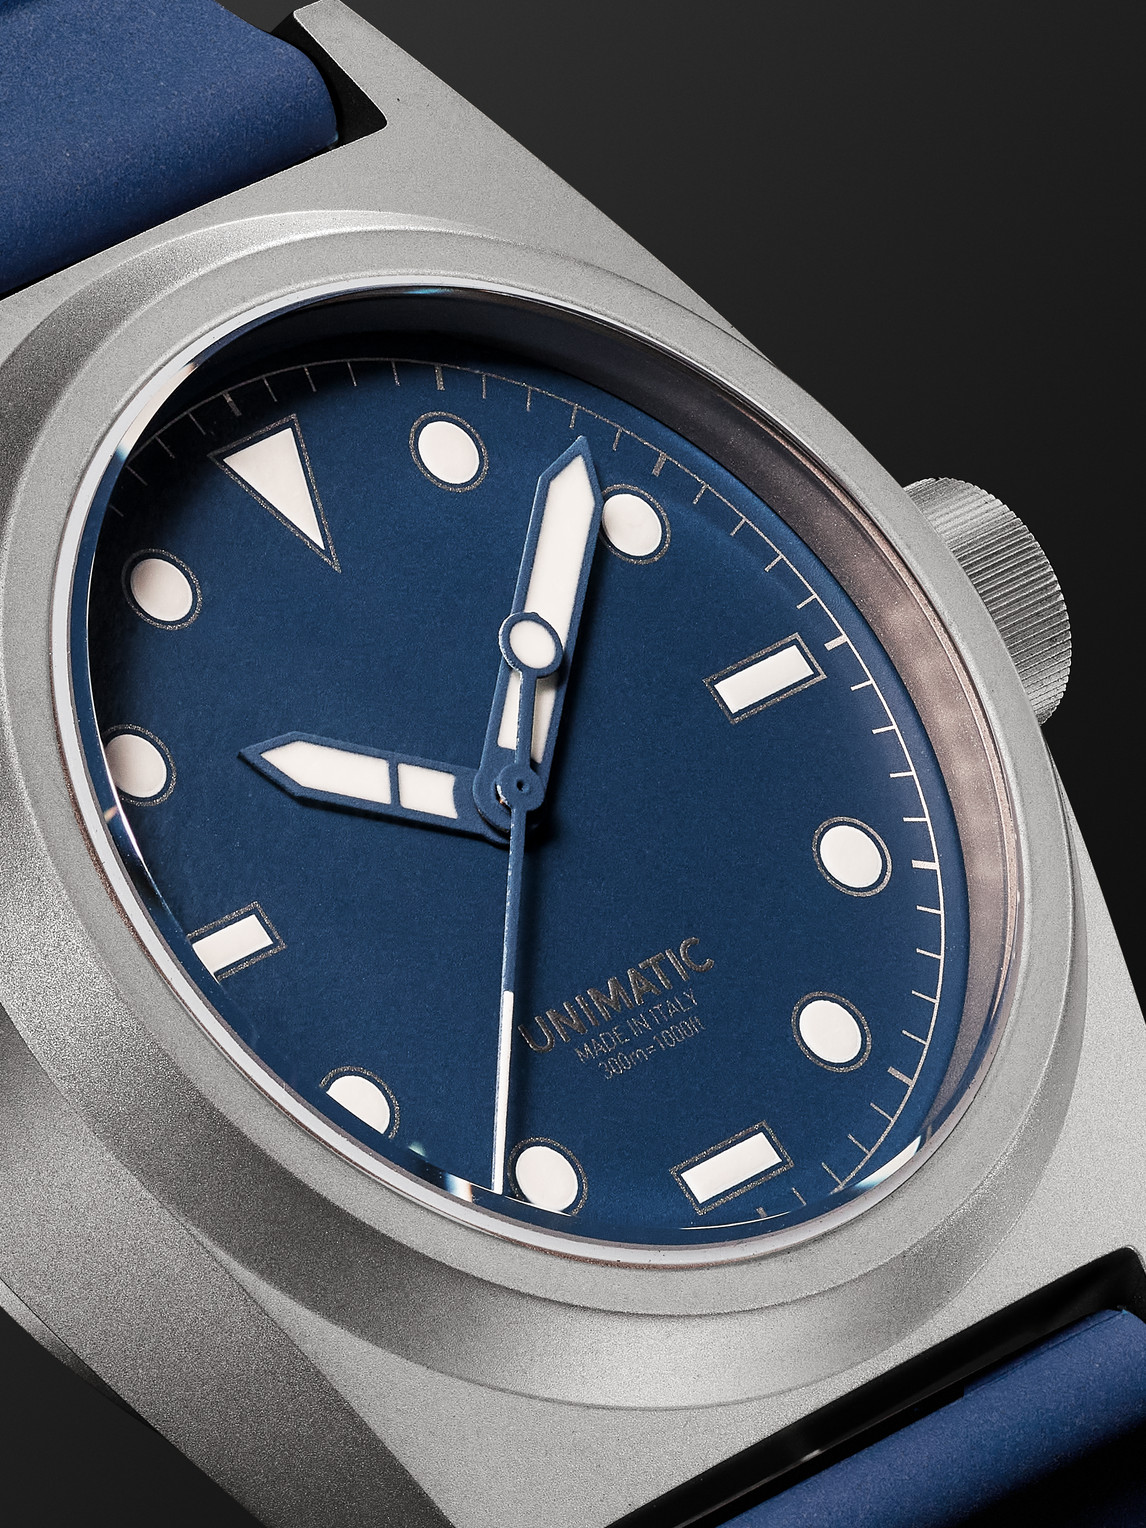 Shop Unimatic Model Two Limited Edition Automatic 38mm Titanium And Tpu Watch, Ref. No. U2s-t-mp In Blue